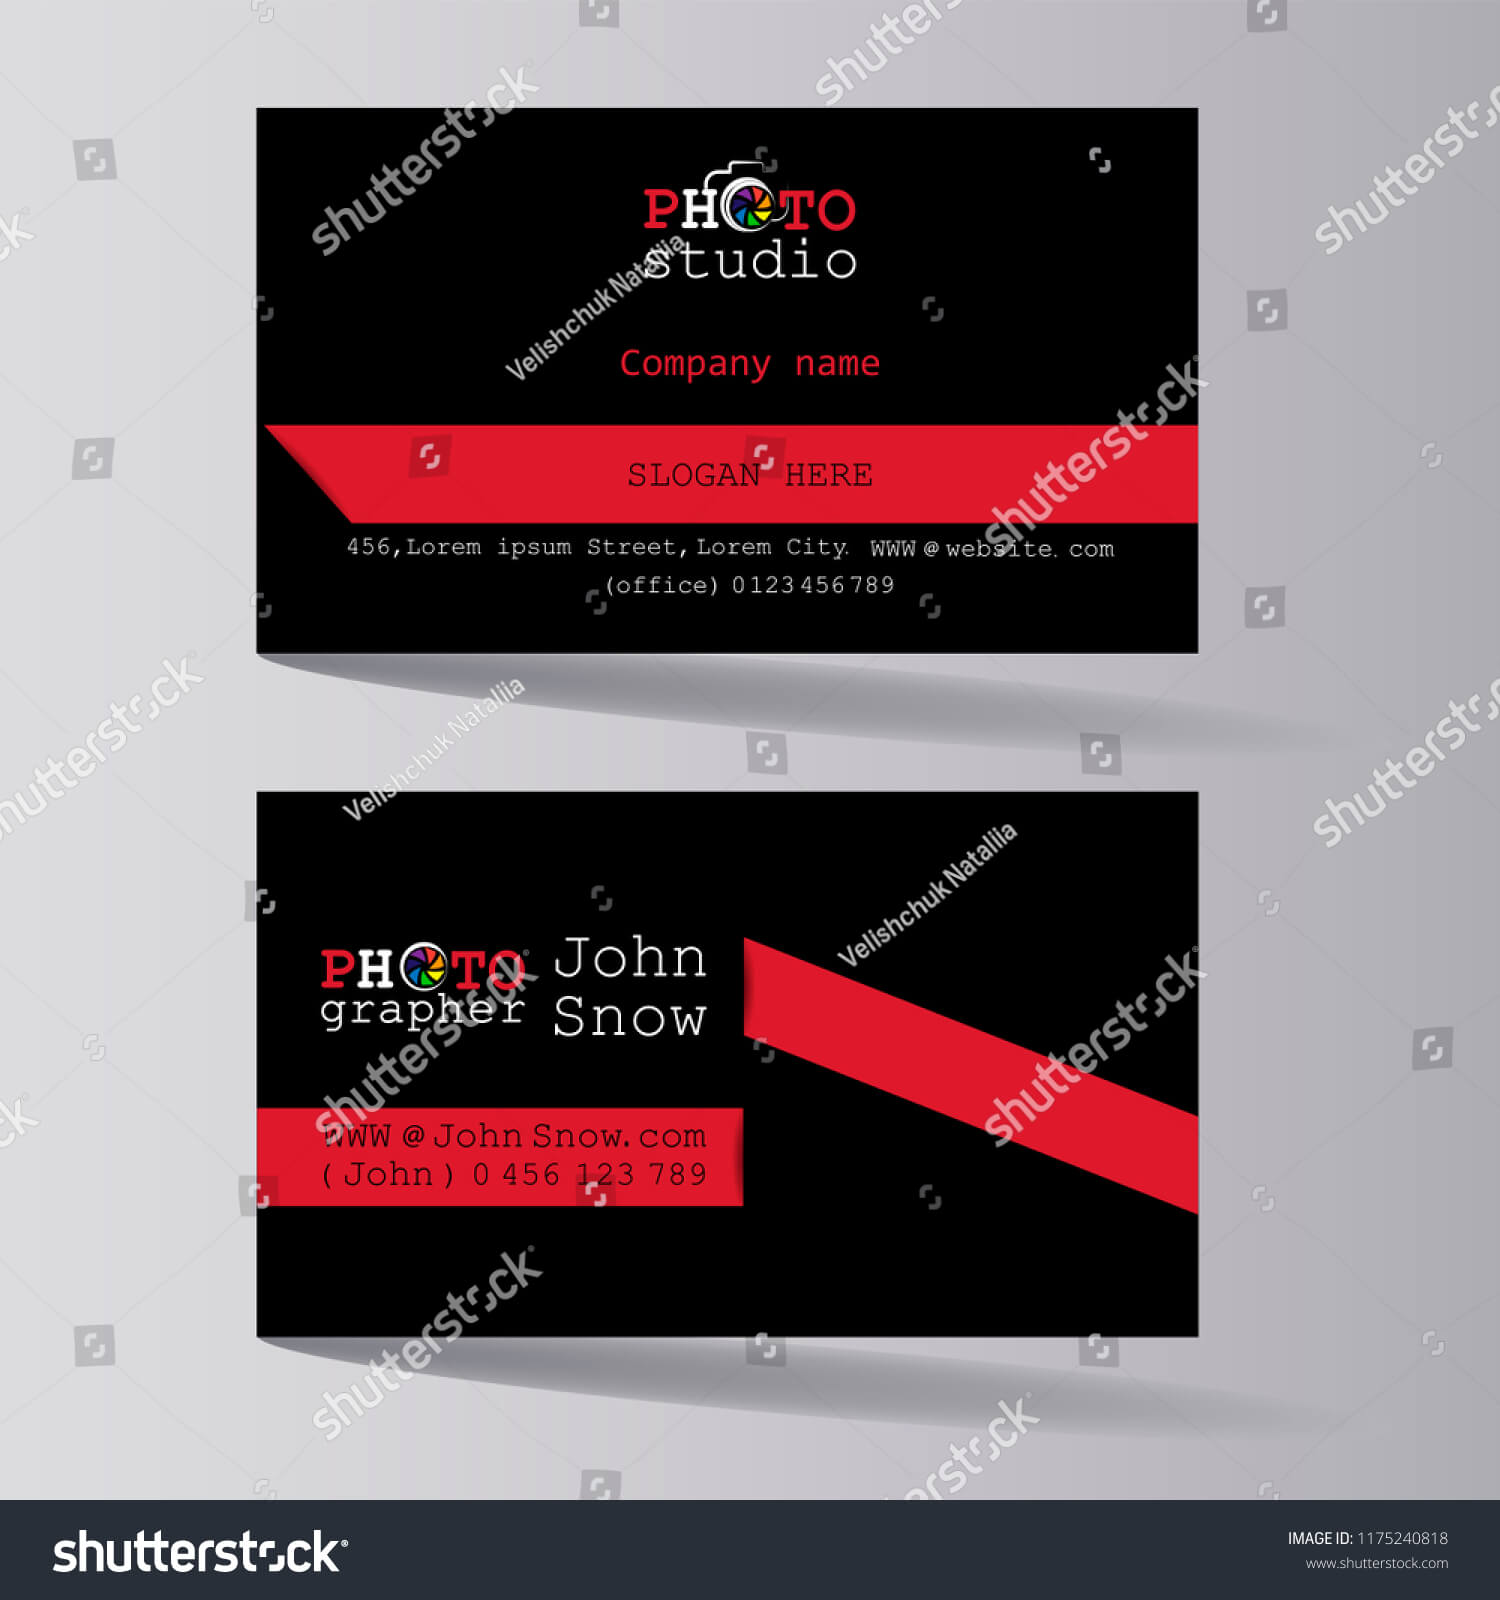 Photo Studio Business Card Photographer Business Stock With Photographer Id Card Template